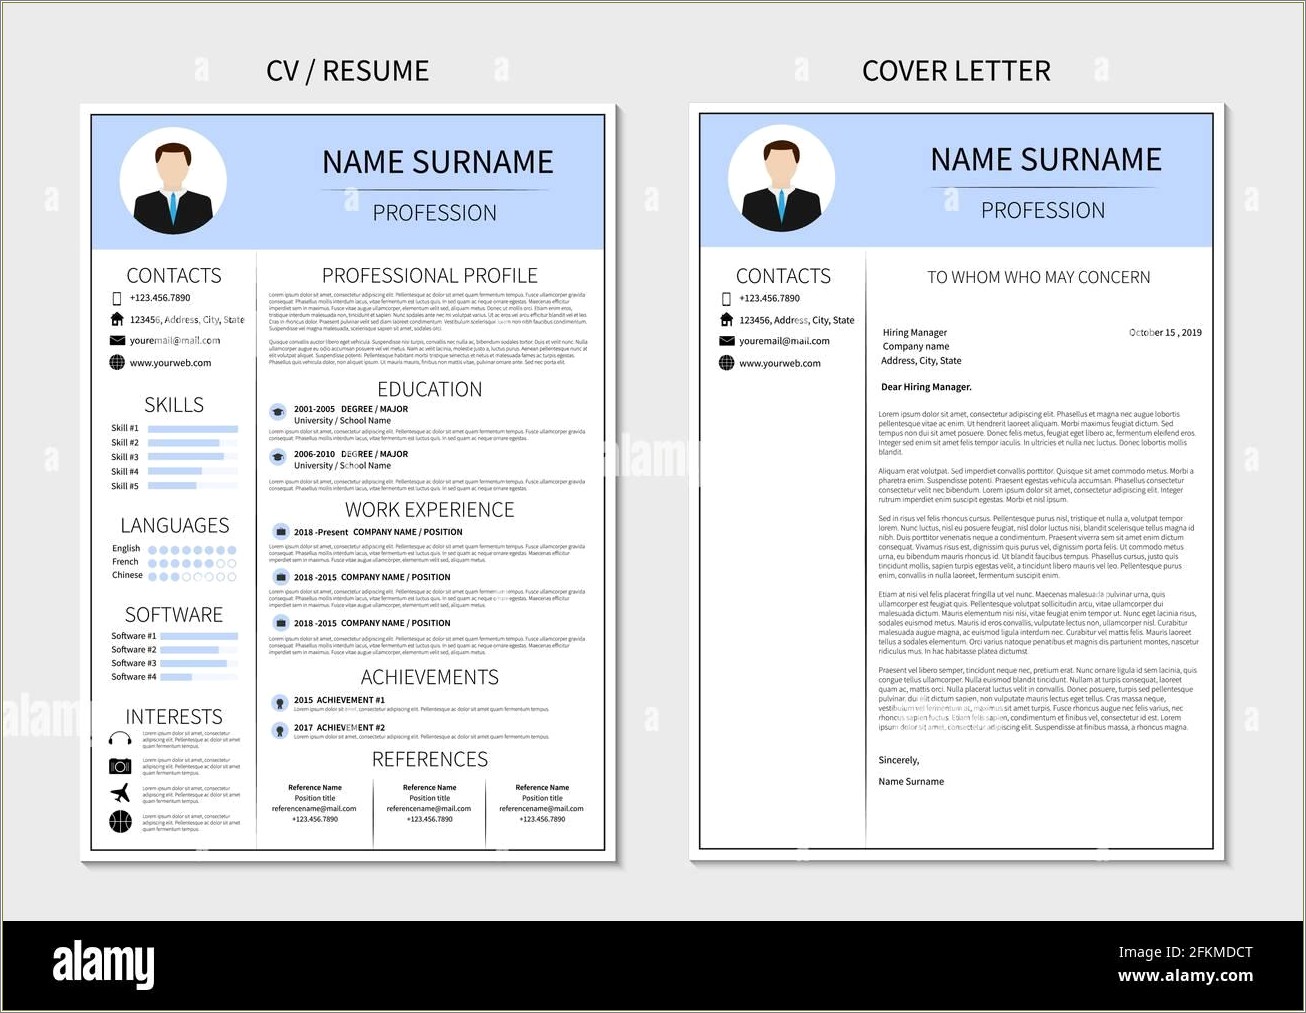 Excellent Cover Letter For Resume Example